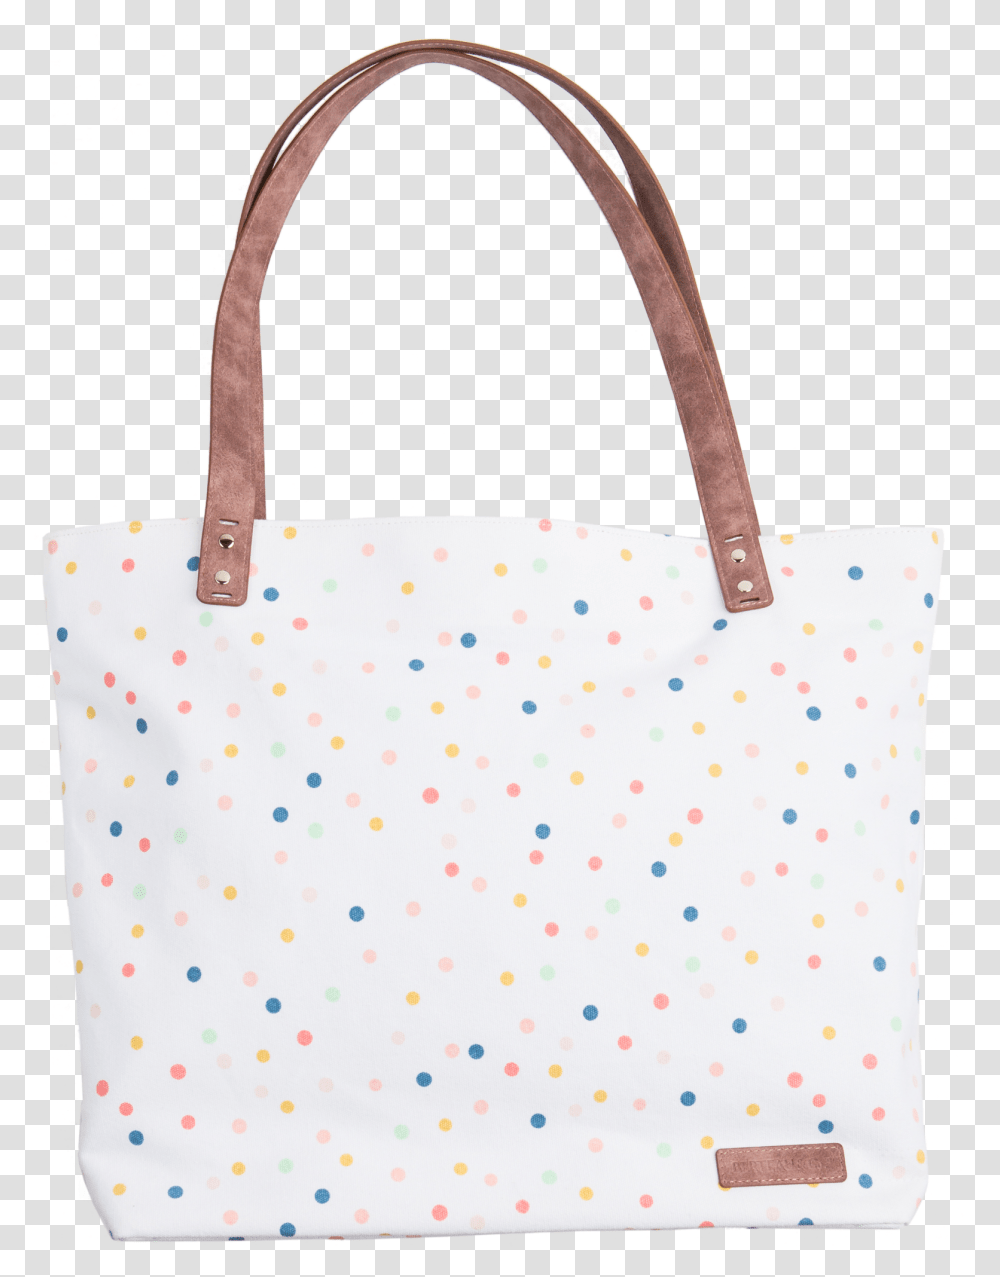 Class Lazyload Lazyload Mirage Cloudzoom Featured Image Tote Bag, Rug, Accessories, Accessory, Handbag Transparent Png